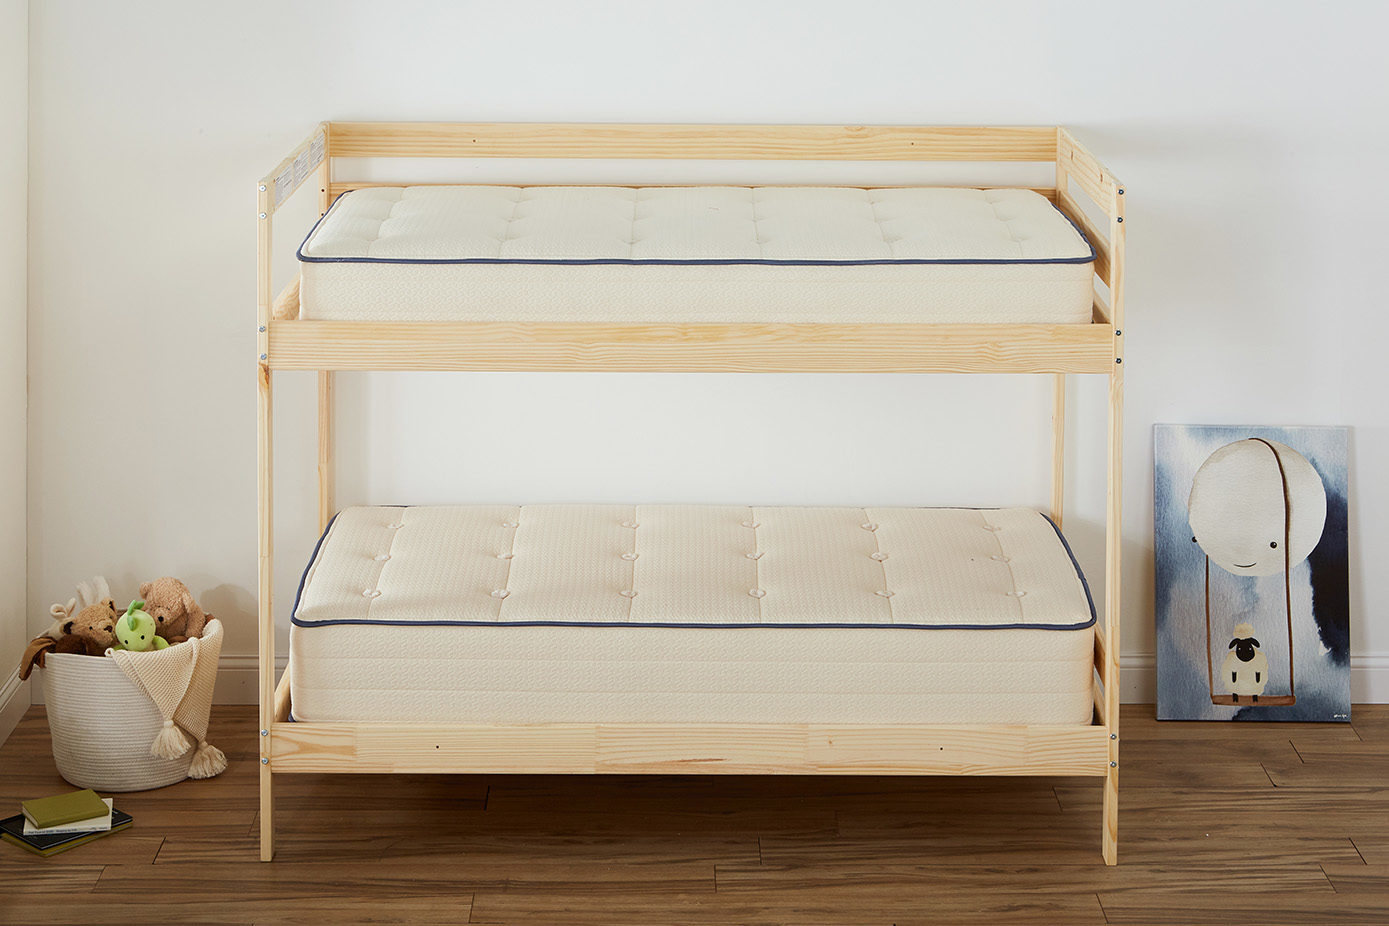 Kiwi Bunk Bed Mattresses, What Mattress Is Best For Bunk Beds